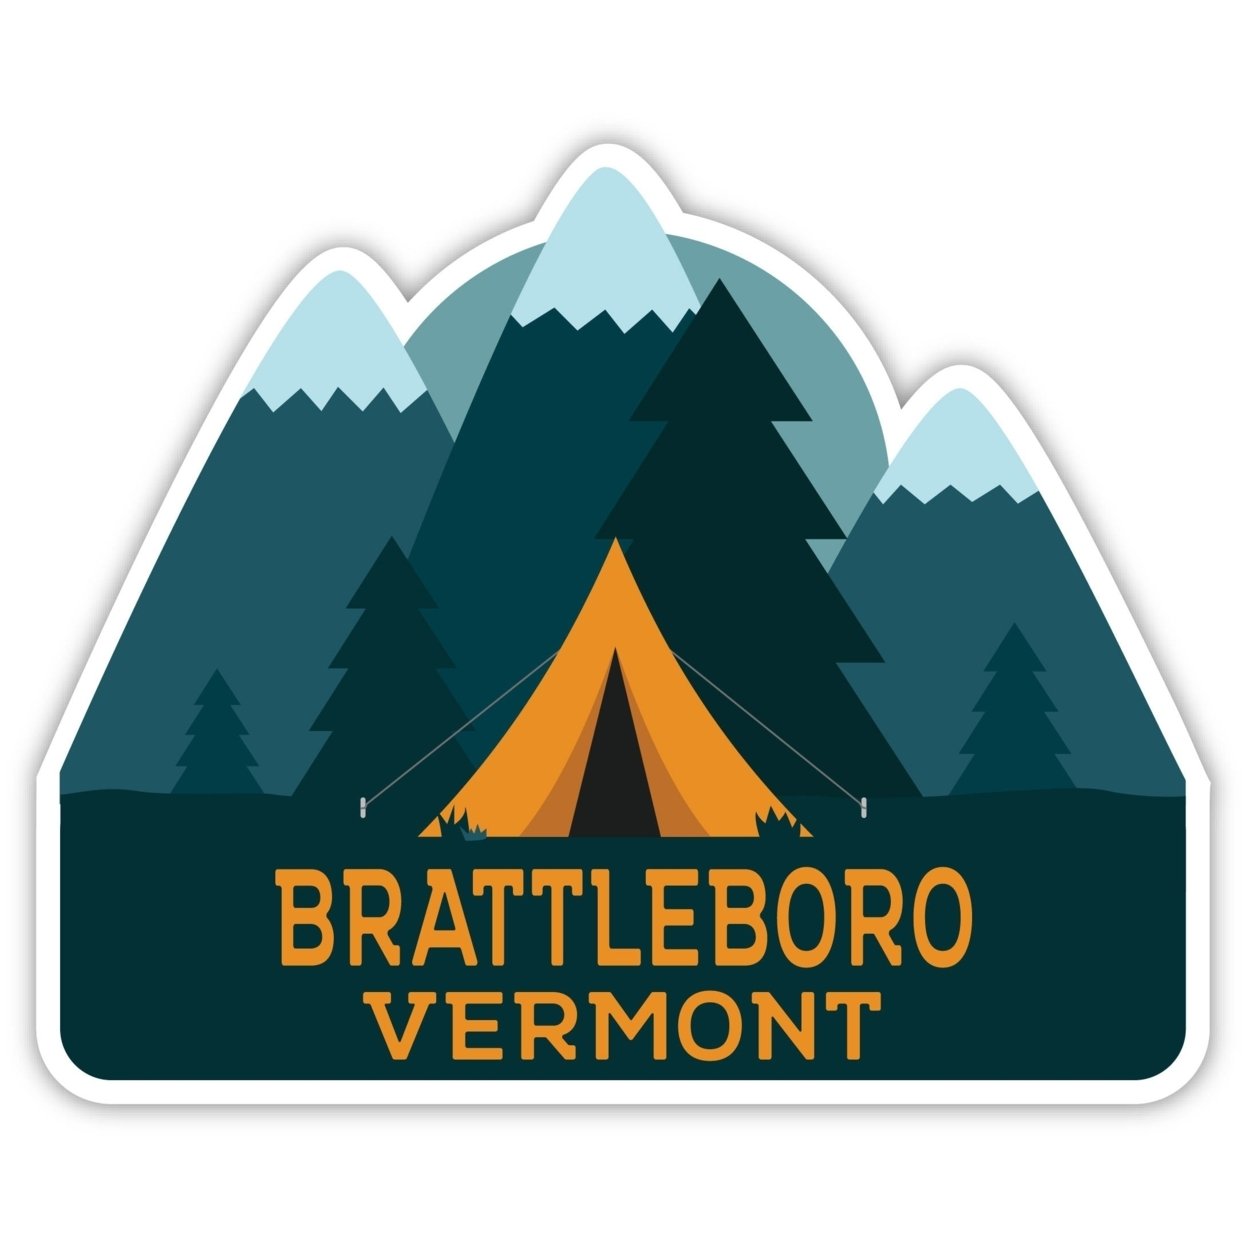 Brattleboro Vermont Souvenir Decorative Stickers (Choose Theme And Size) - 4-Pack, 2-Inch, Great Outdoors